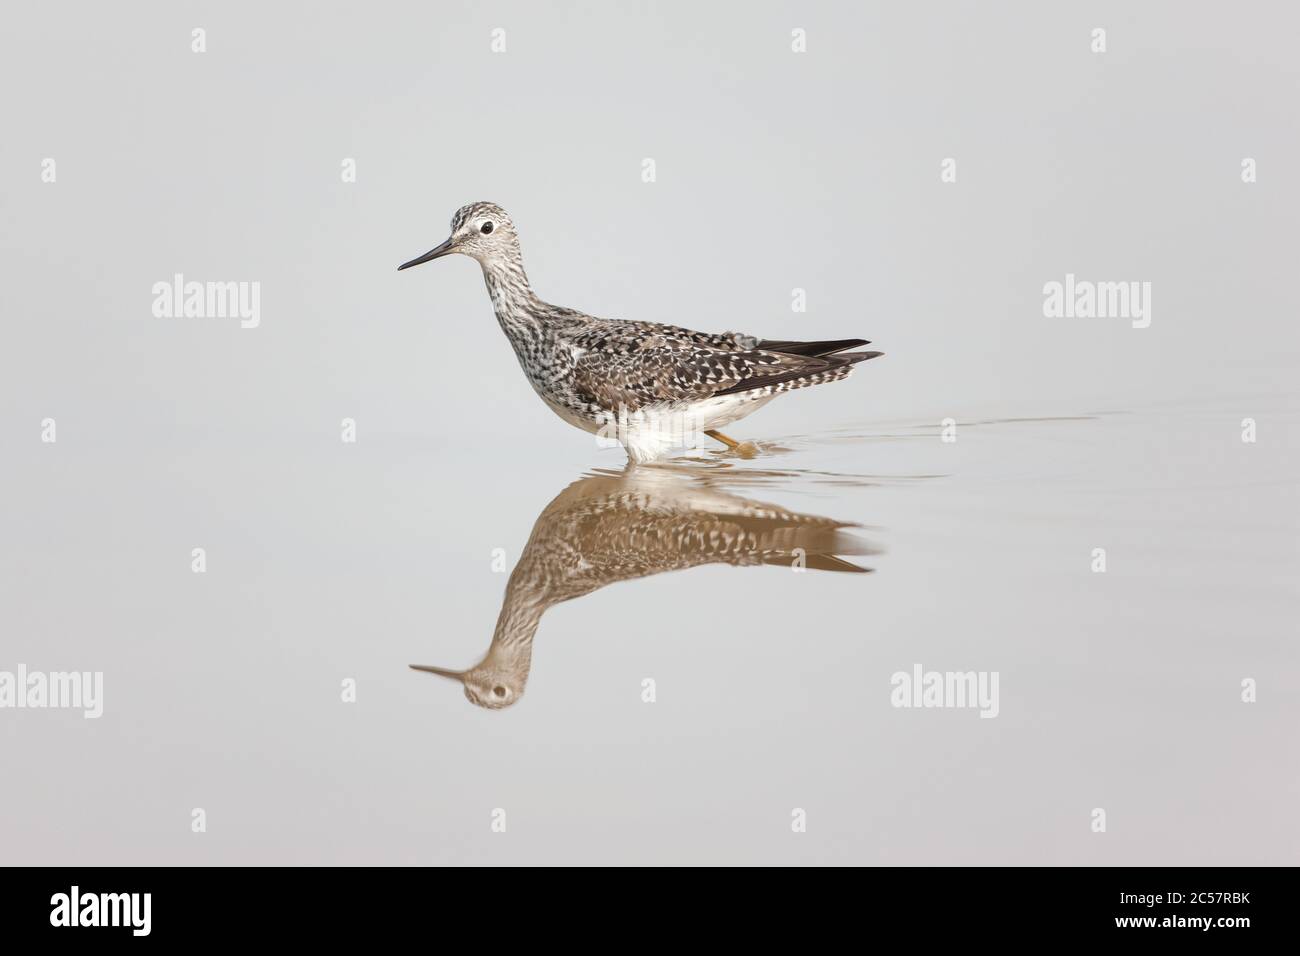 A willet Tringa semipalmata stands reflected in the calm water of the Florida everglades national park, Florida USA Stock Photo